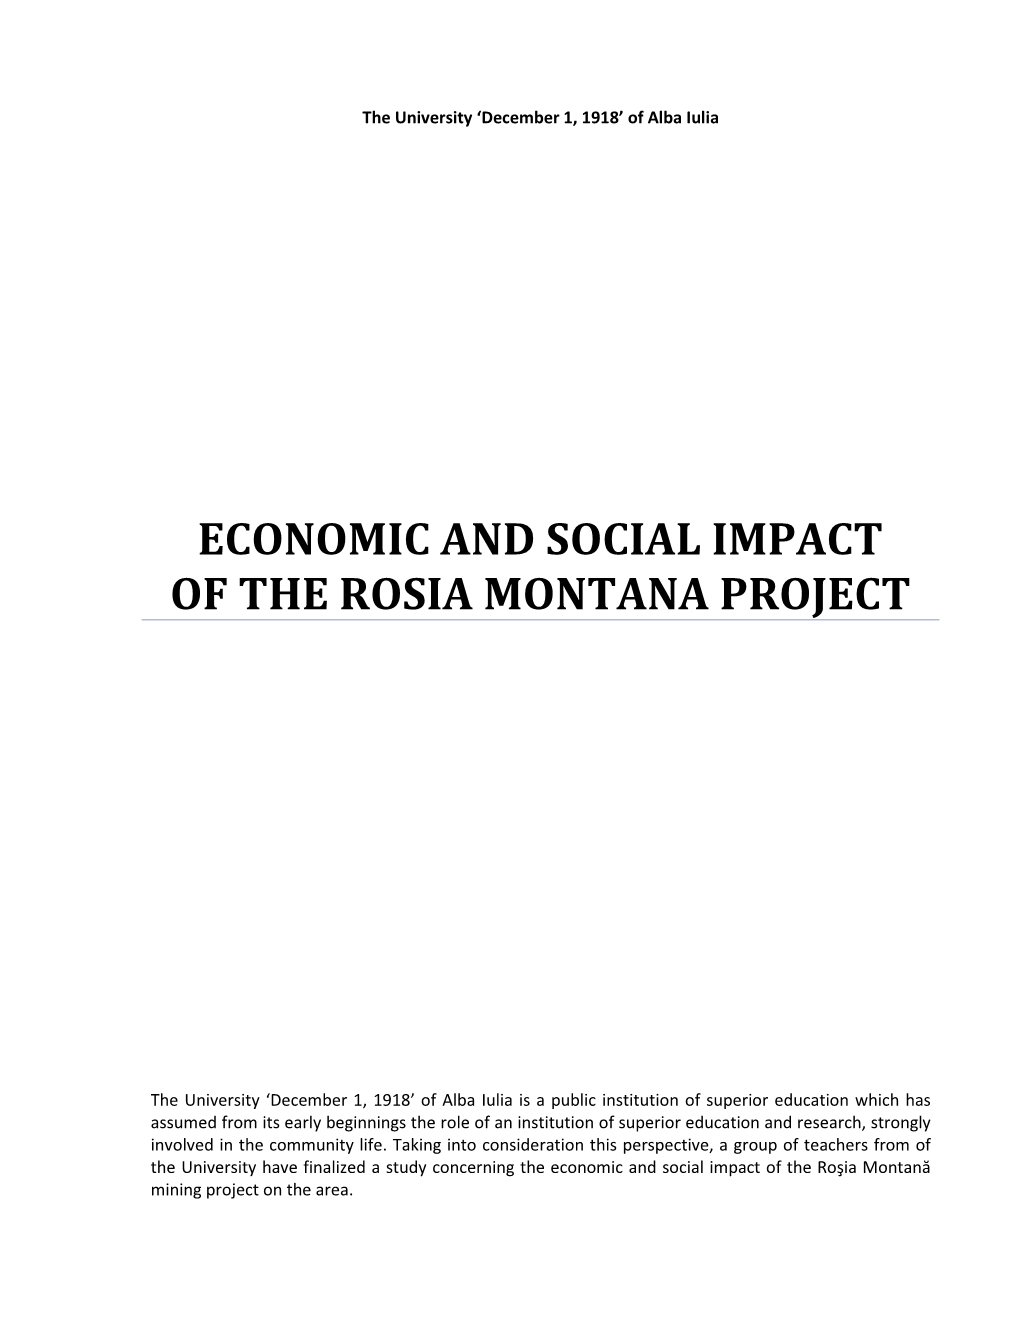 Economic and Social Impact of the Rosia Montana Project